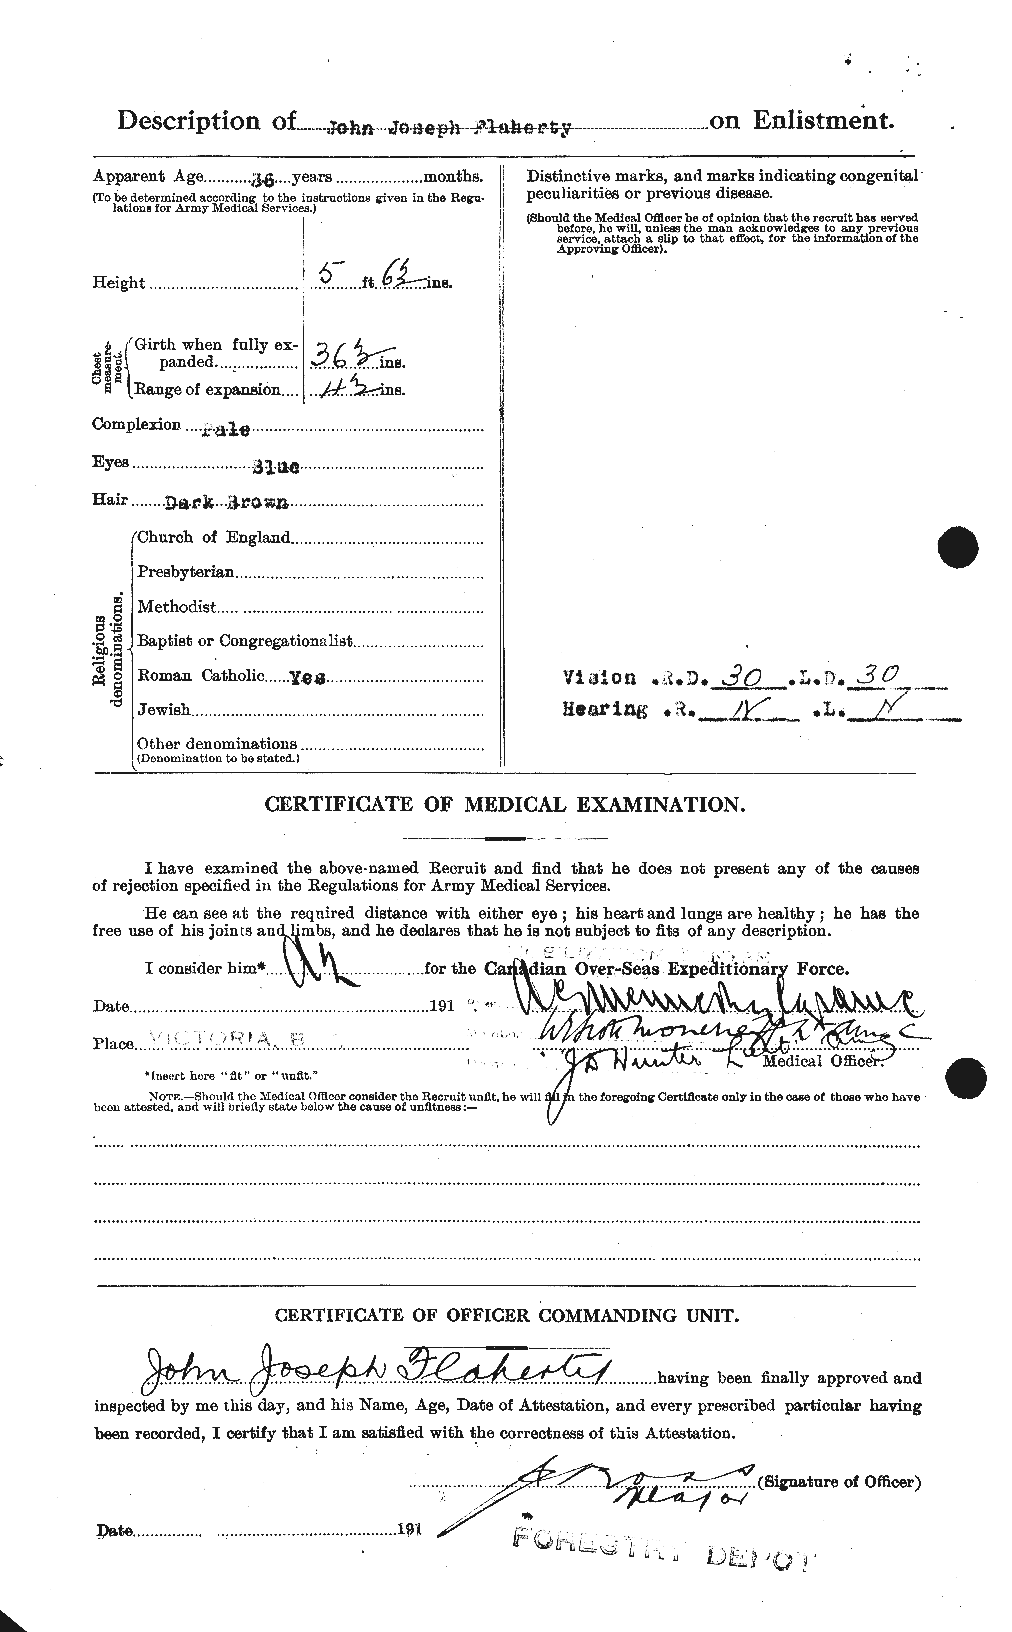 Personnel Records of the First World War - CEF 323365b